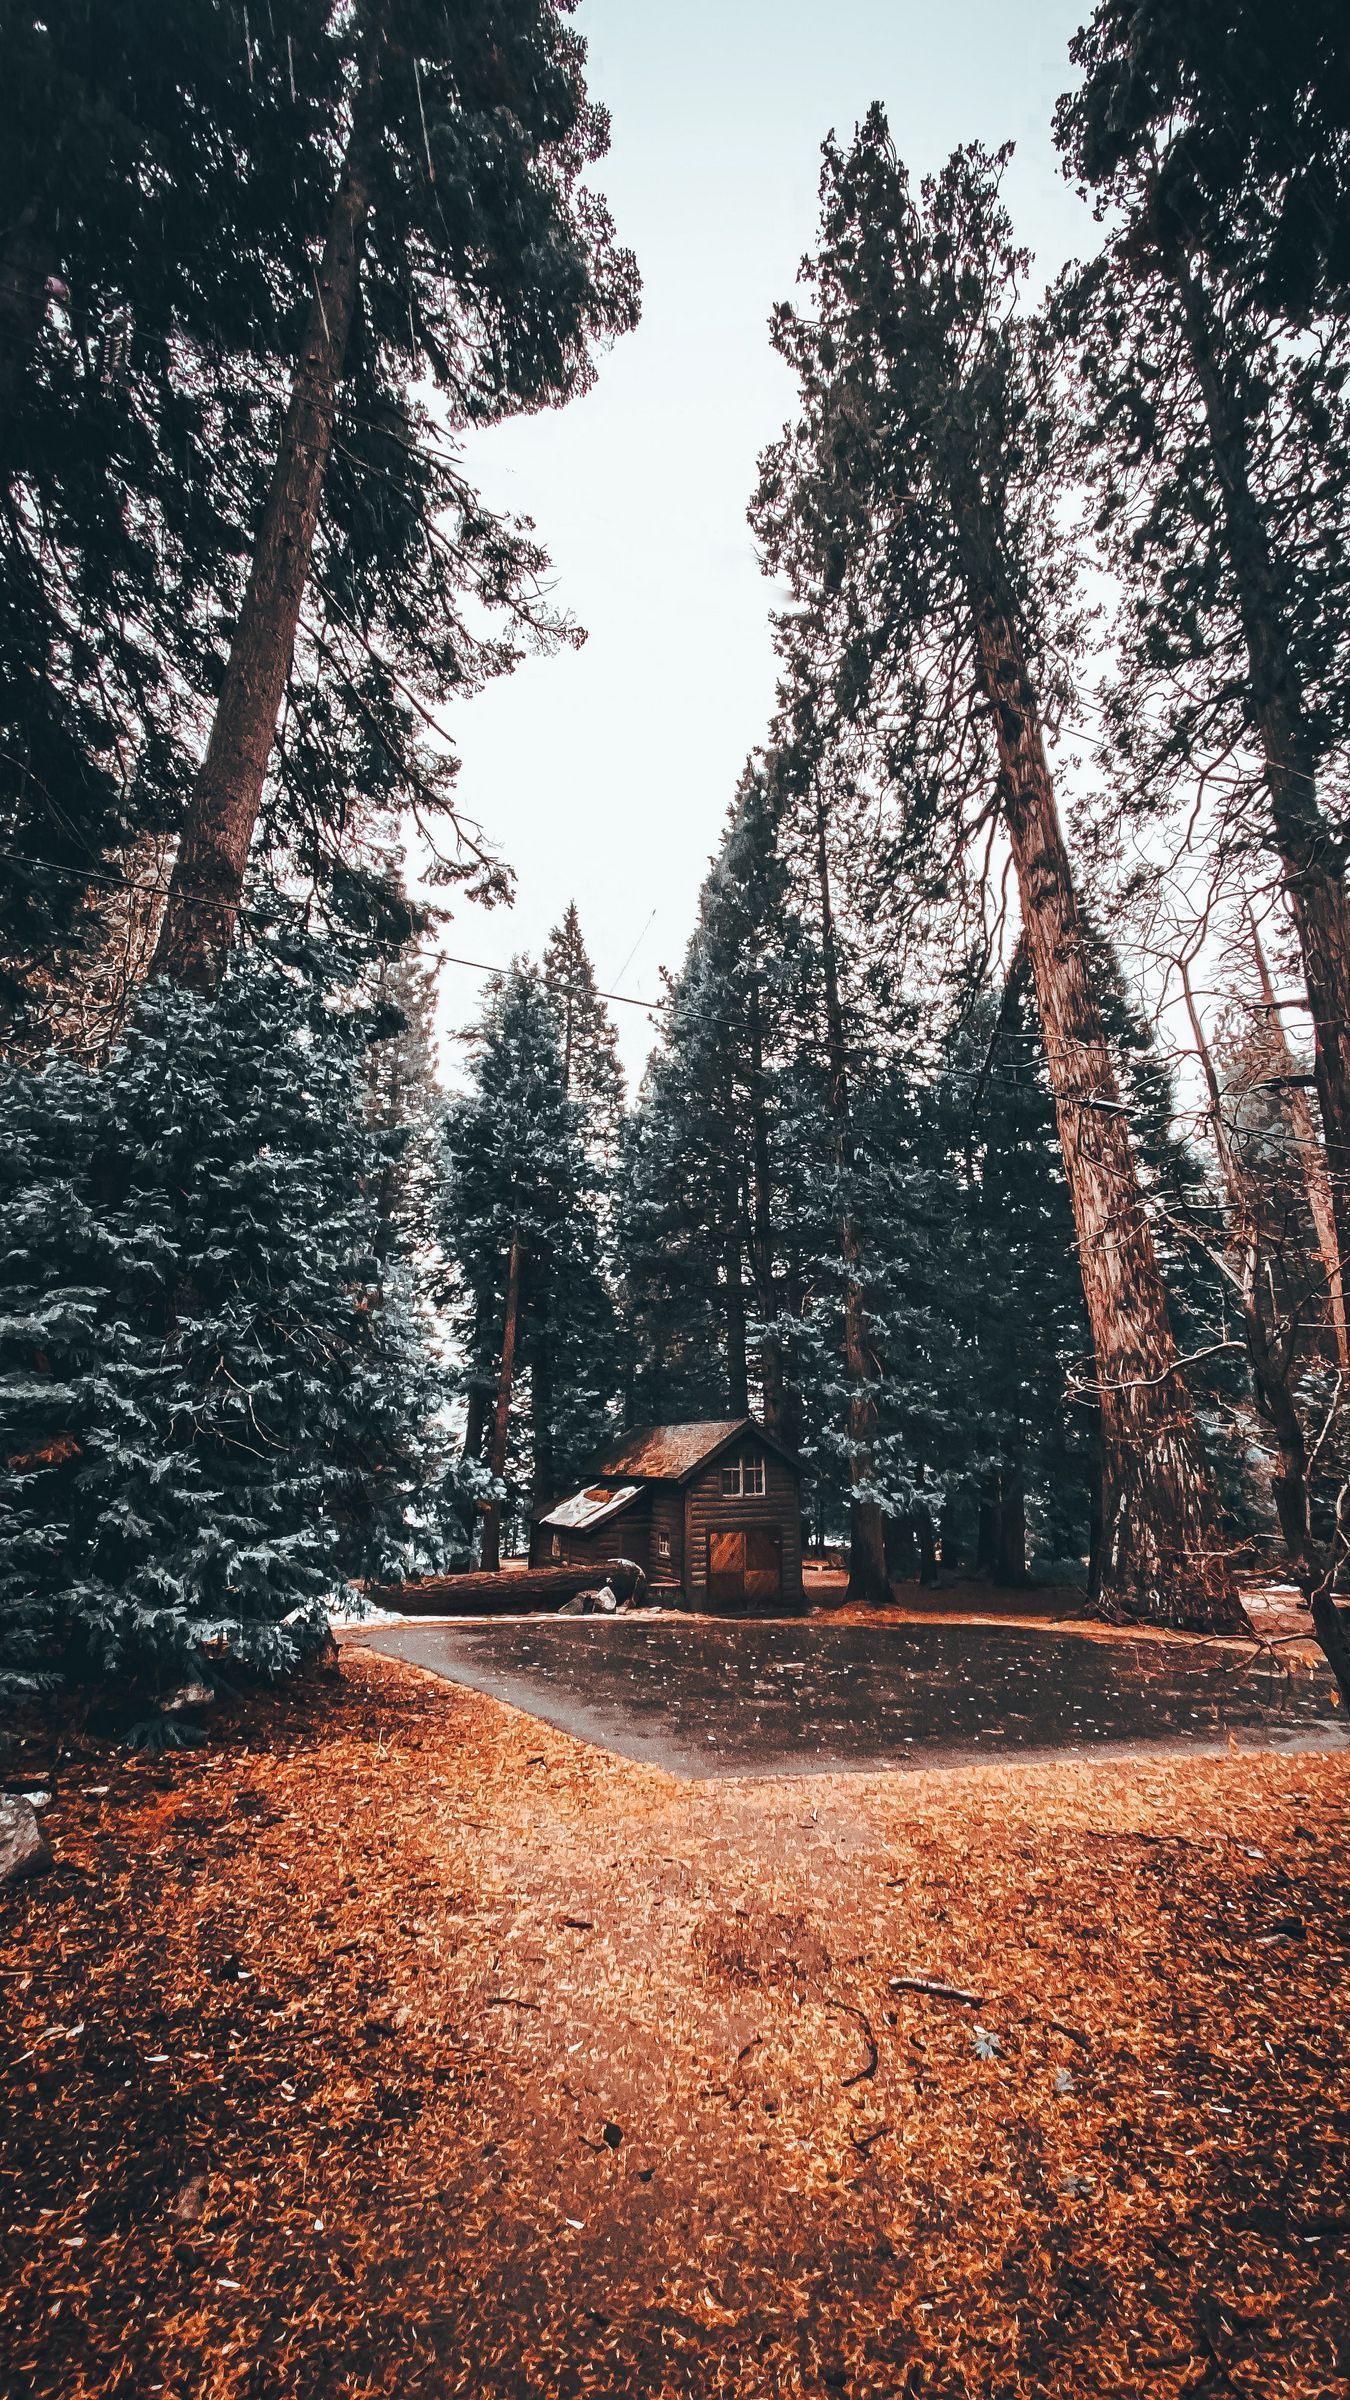 Download wallpaper 1350x2400 house, trees, forest, comfort, alone, nature iphone 8+/7+/6s+/for parallax HD background